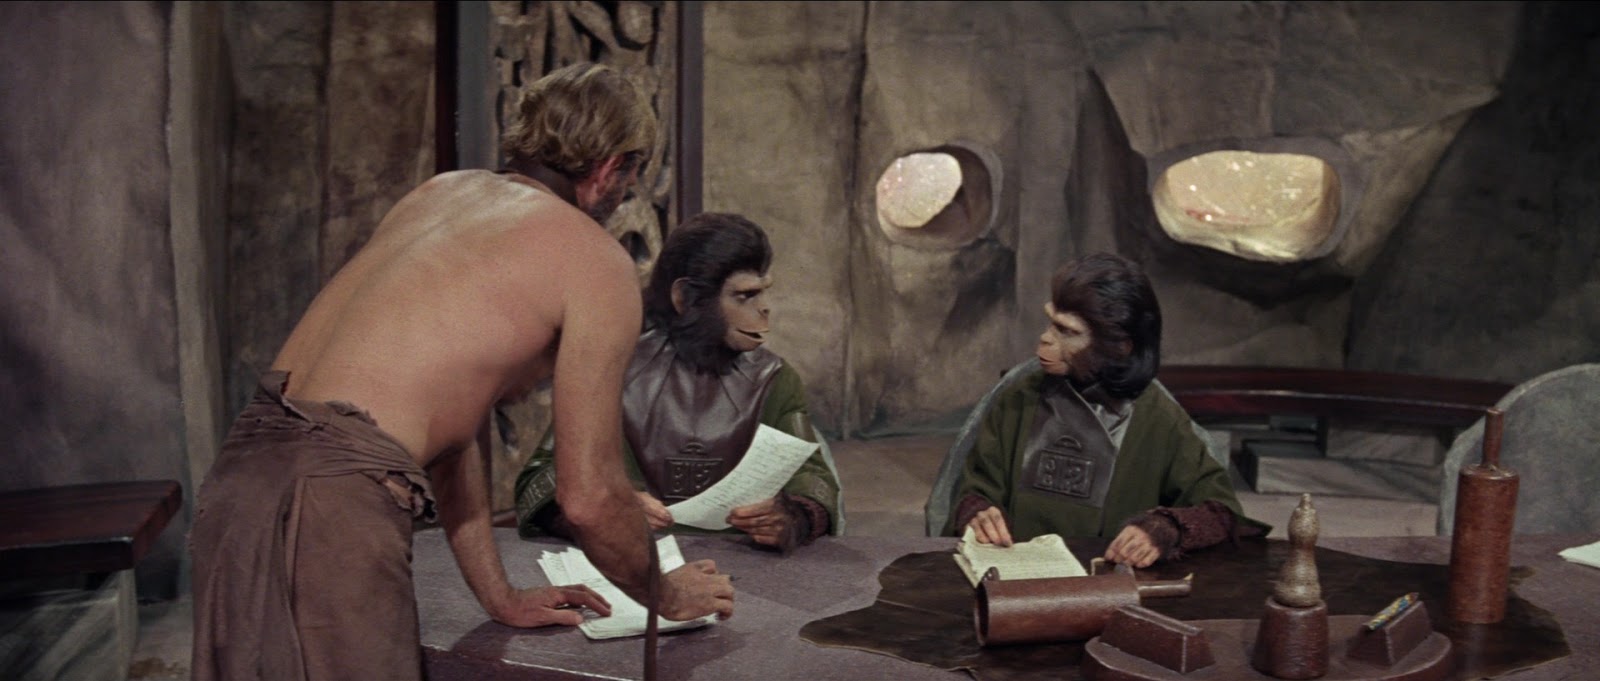 Planet Of The Apes (1968) Part 31.